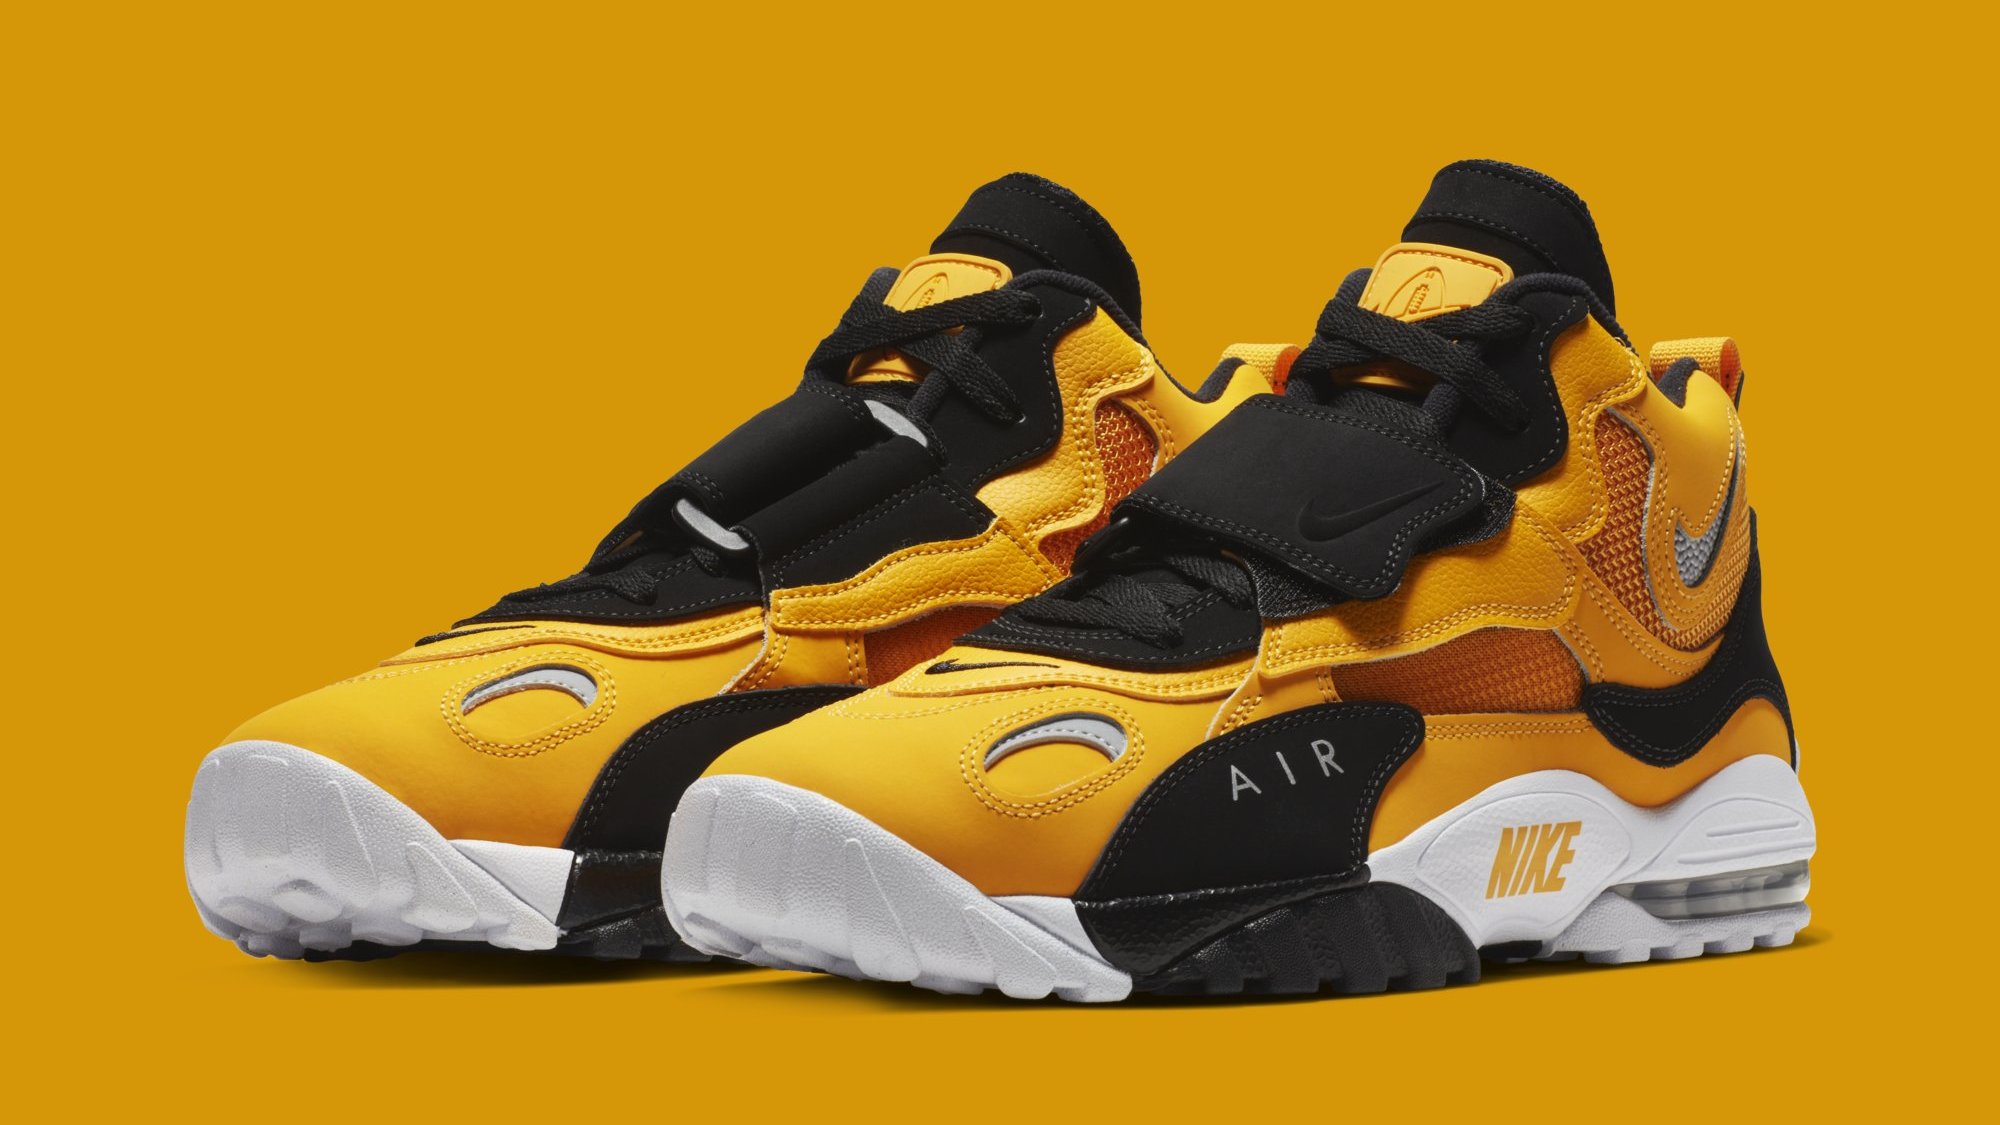 Trolley servet Tweet Nike Outfits the Air Max Speed Turf in Steelers Colors | Complex